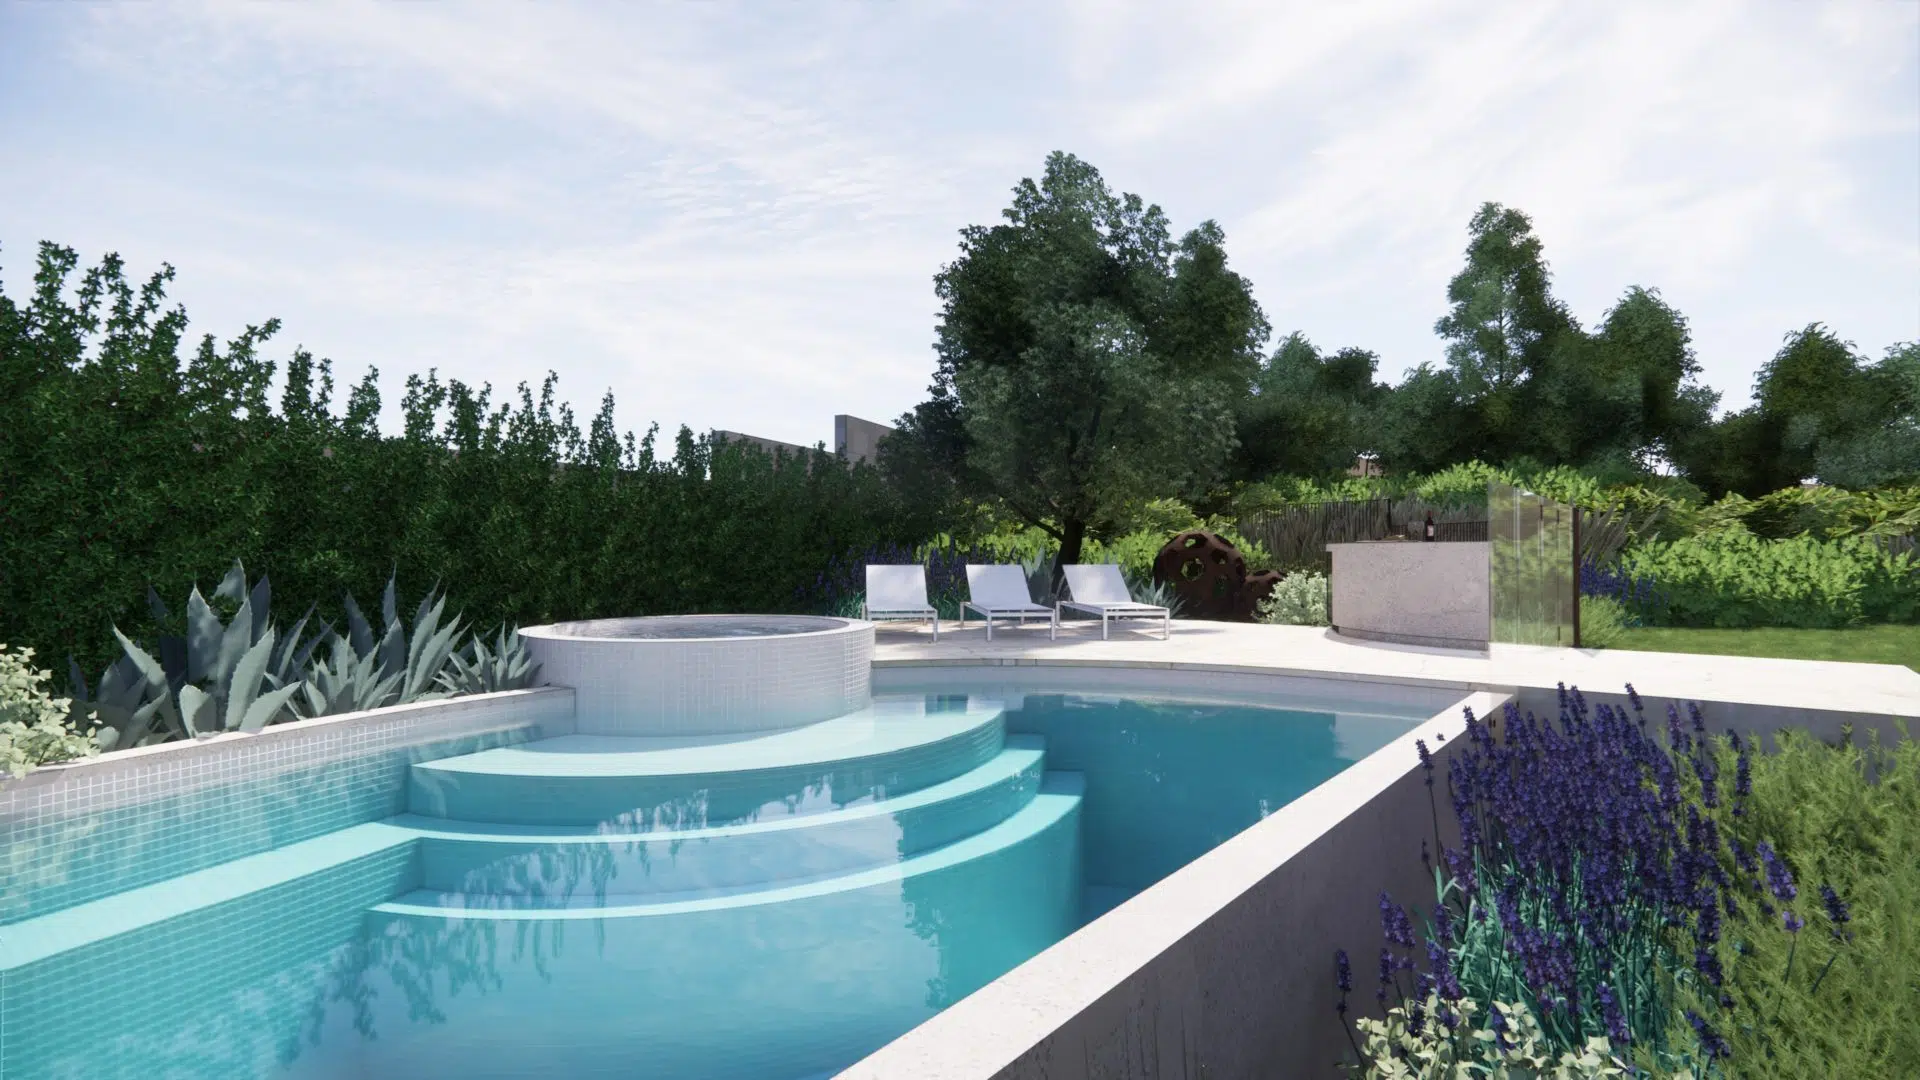 A landscape design illustration representing a custom moated concrete pool and spa